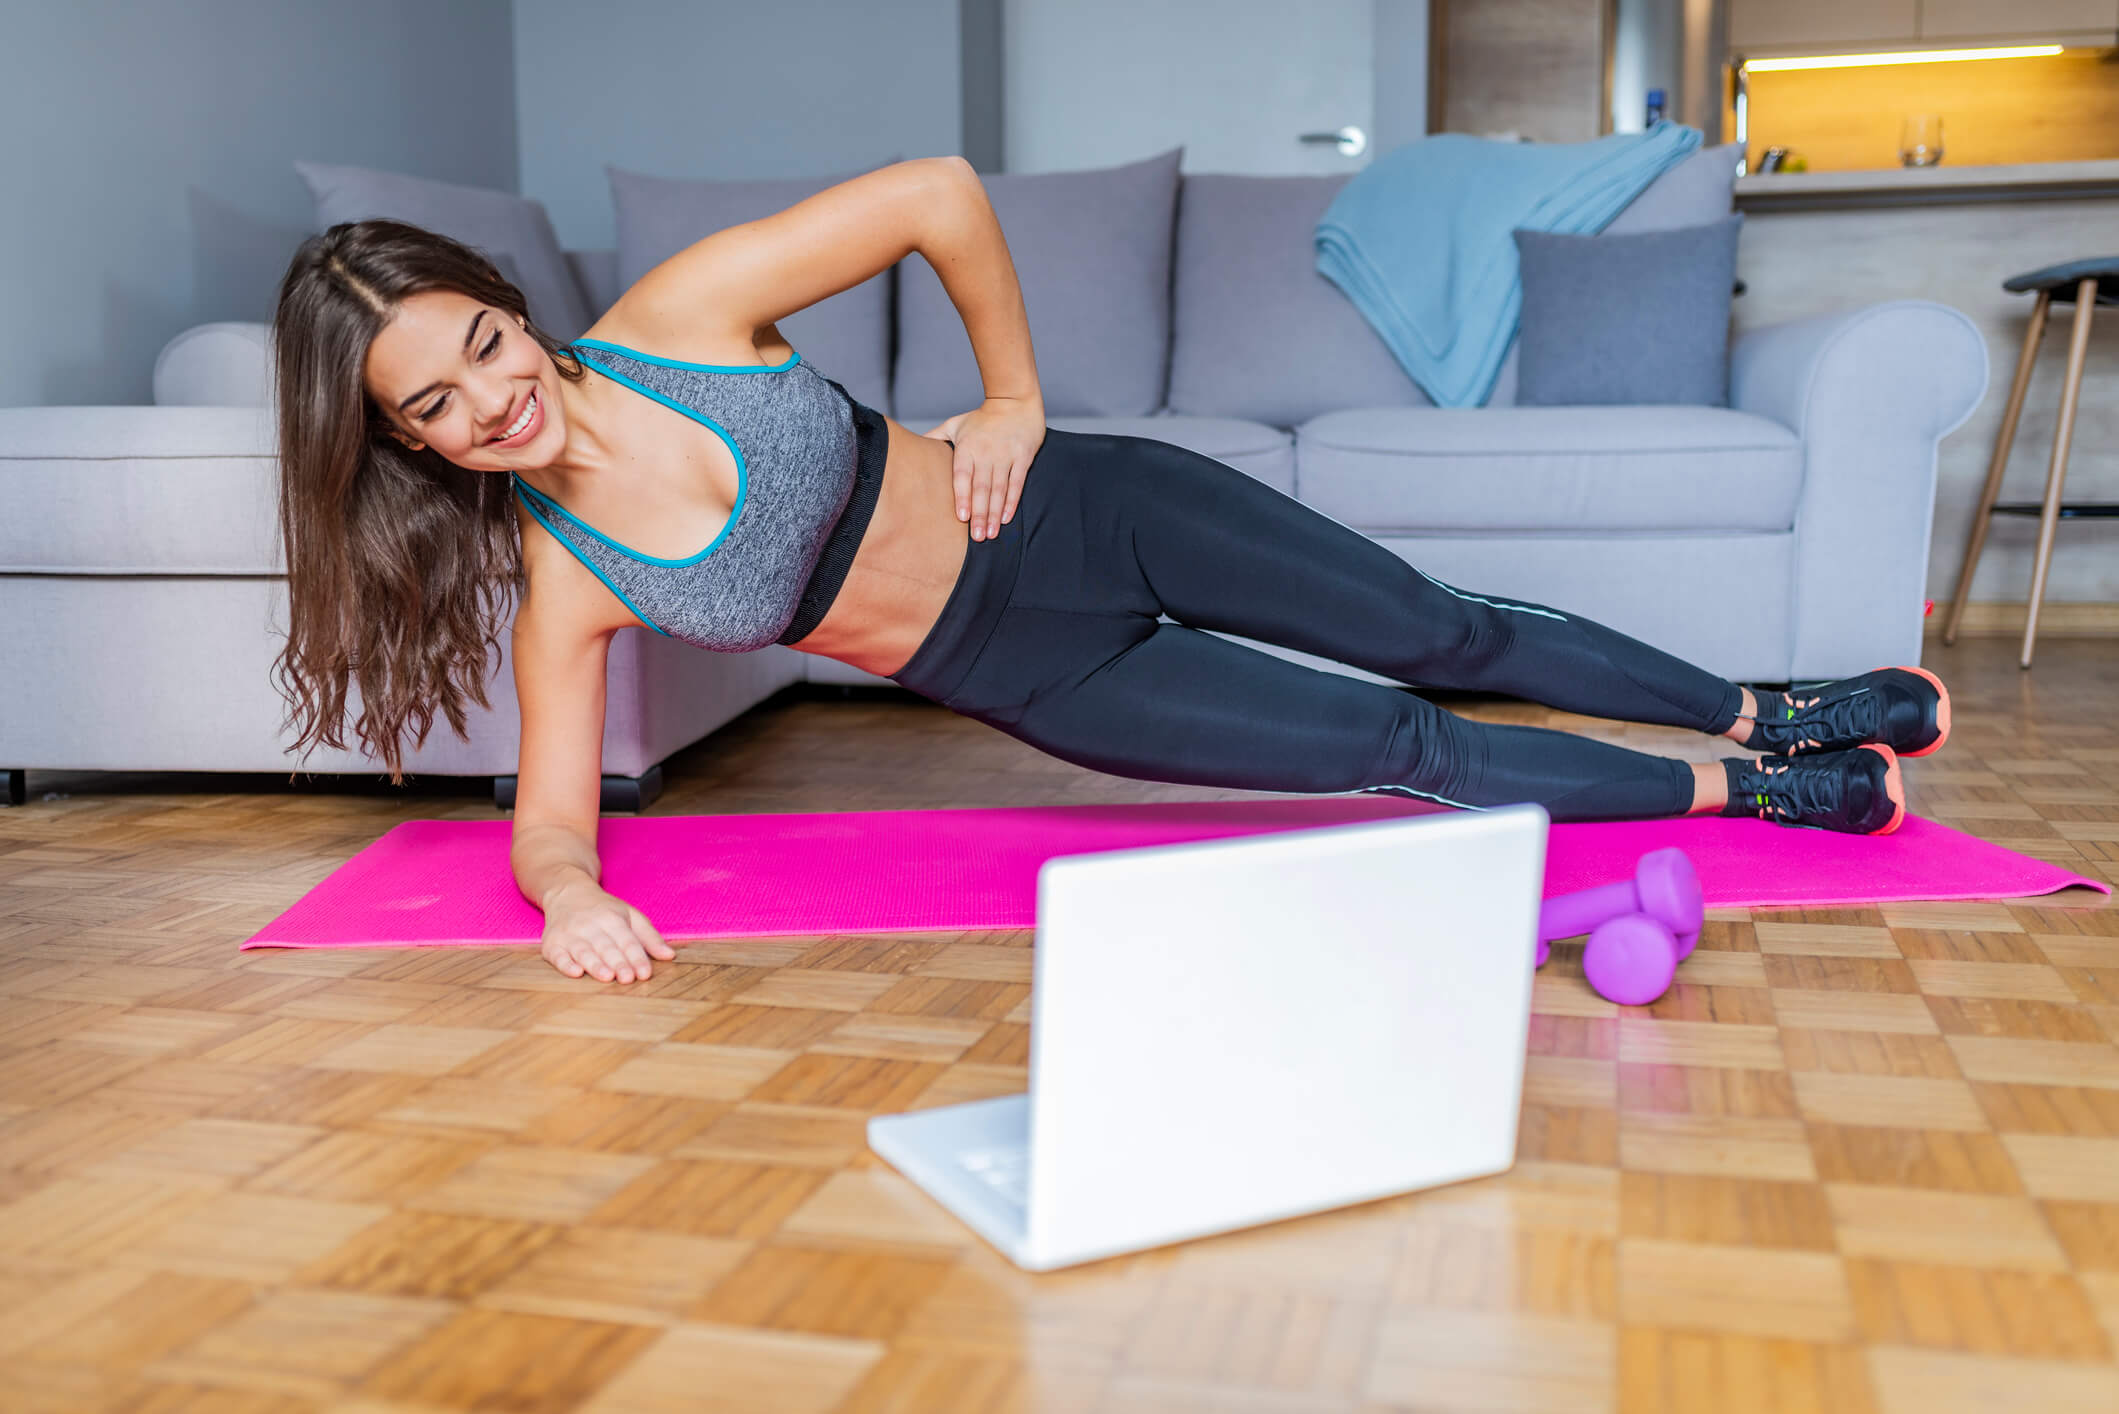 Young woman exercising at home in a living room